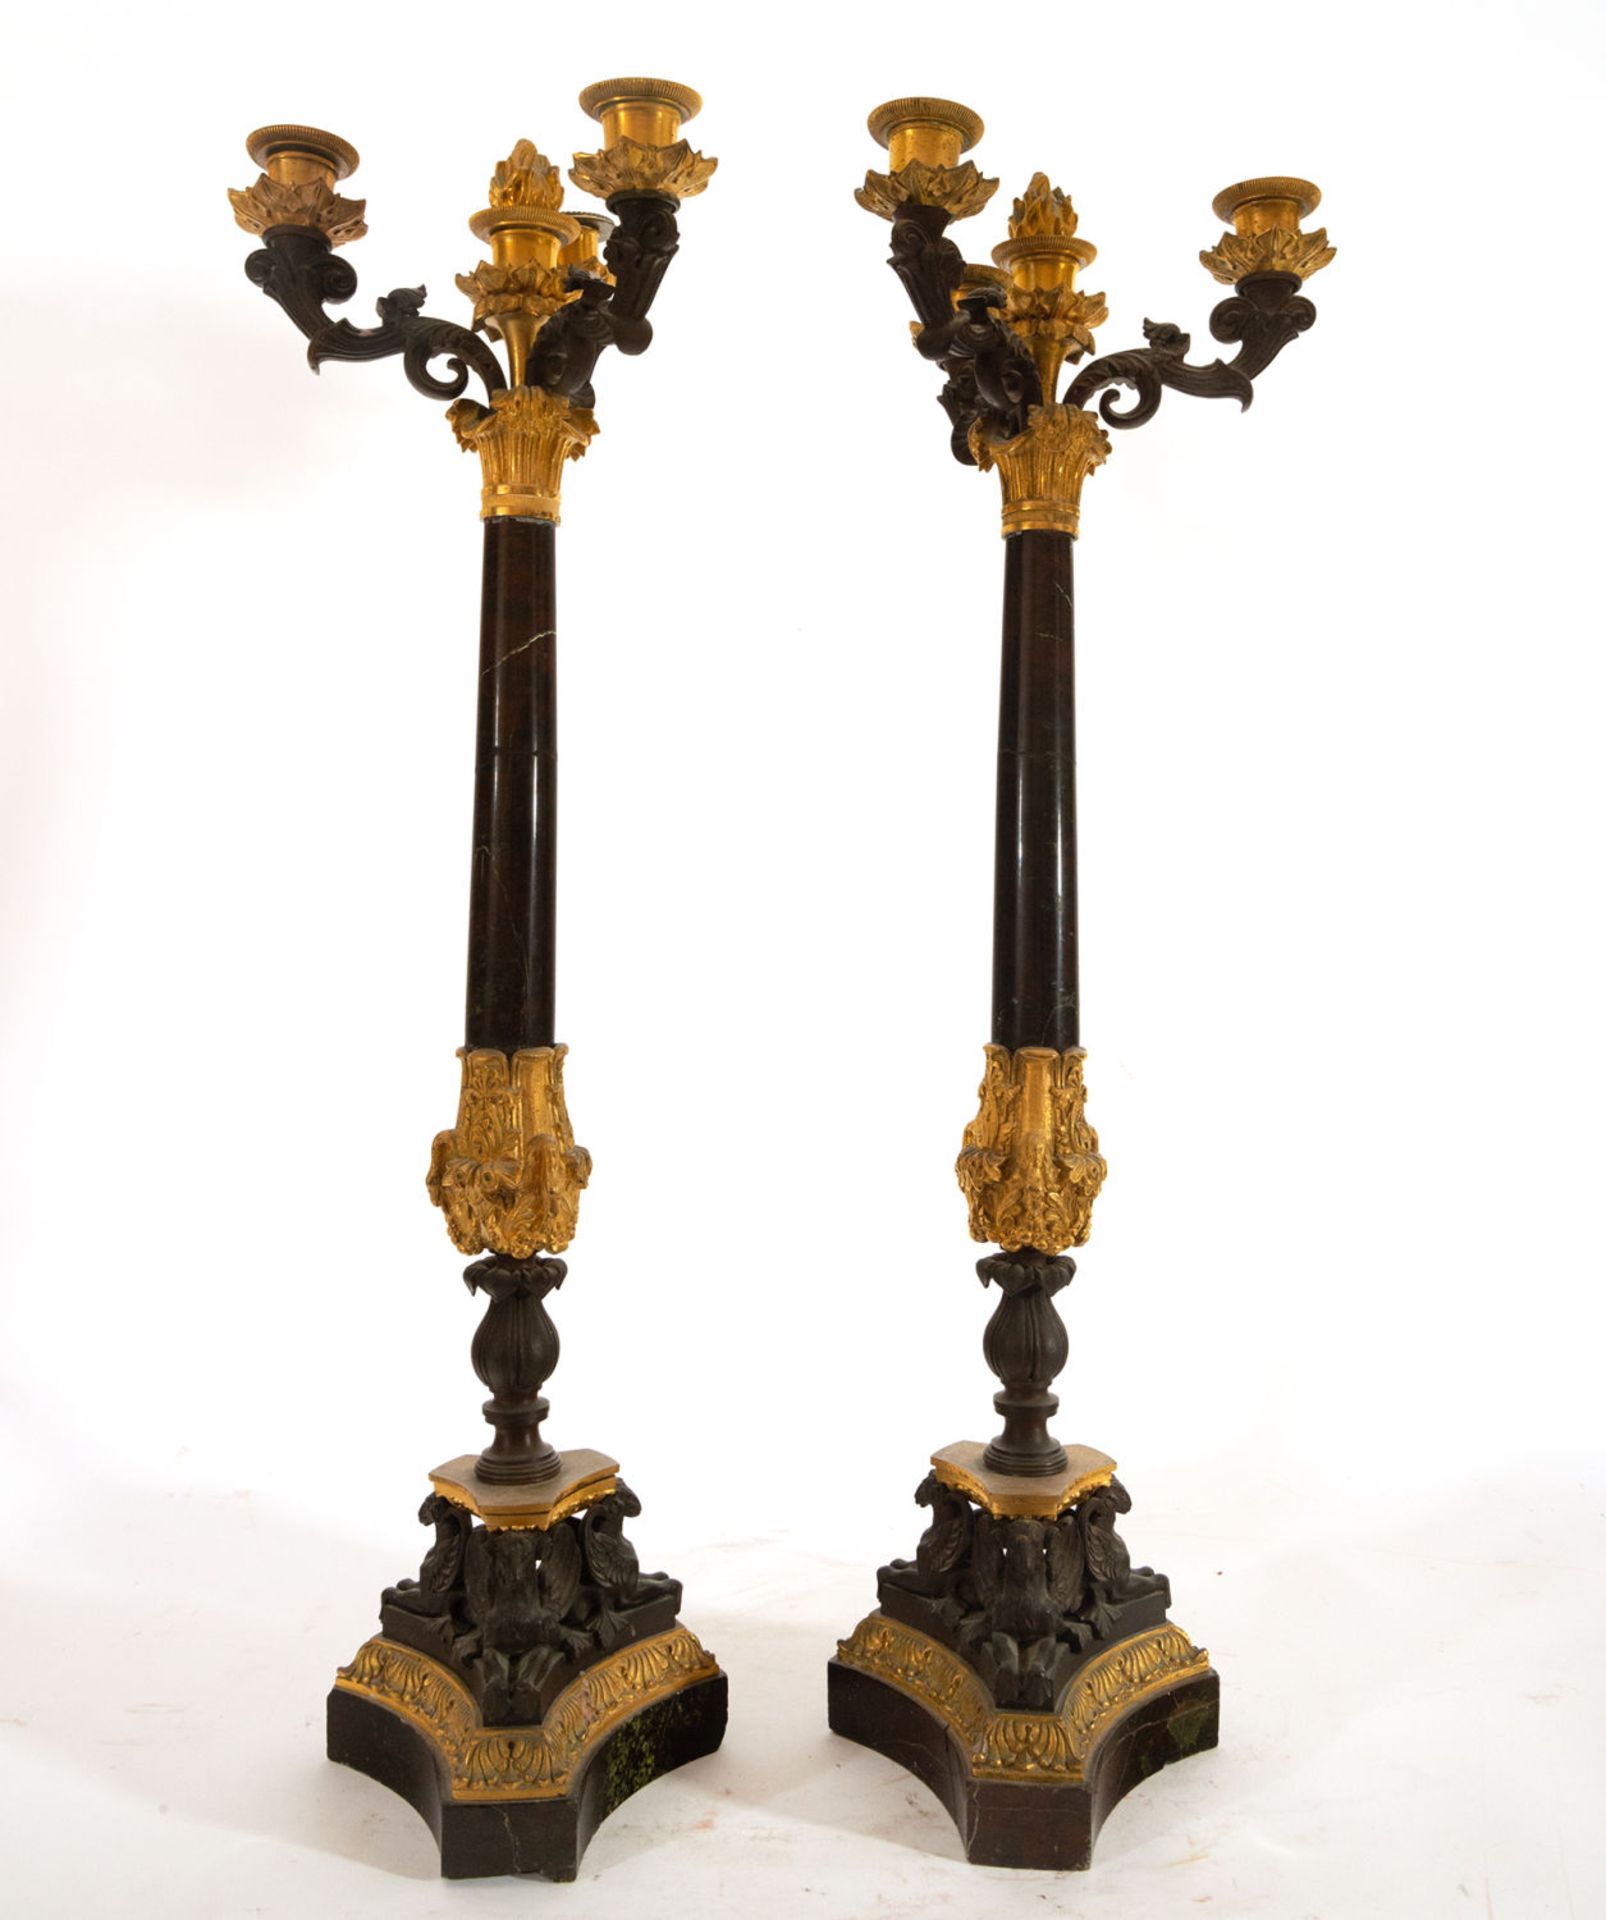 Pair of Candlesticks in Pink Marble, gilt bronze and Empire style patination, 19th century